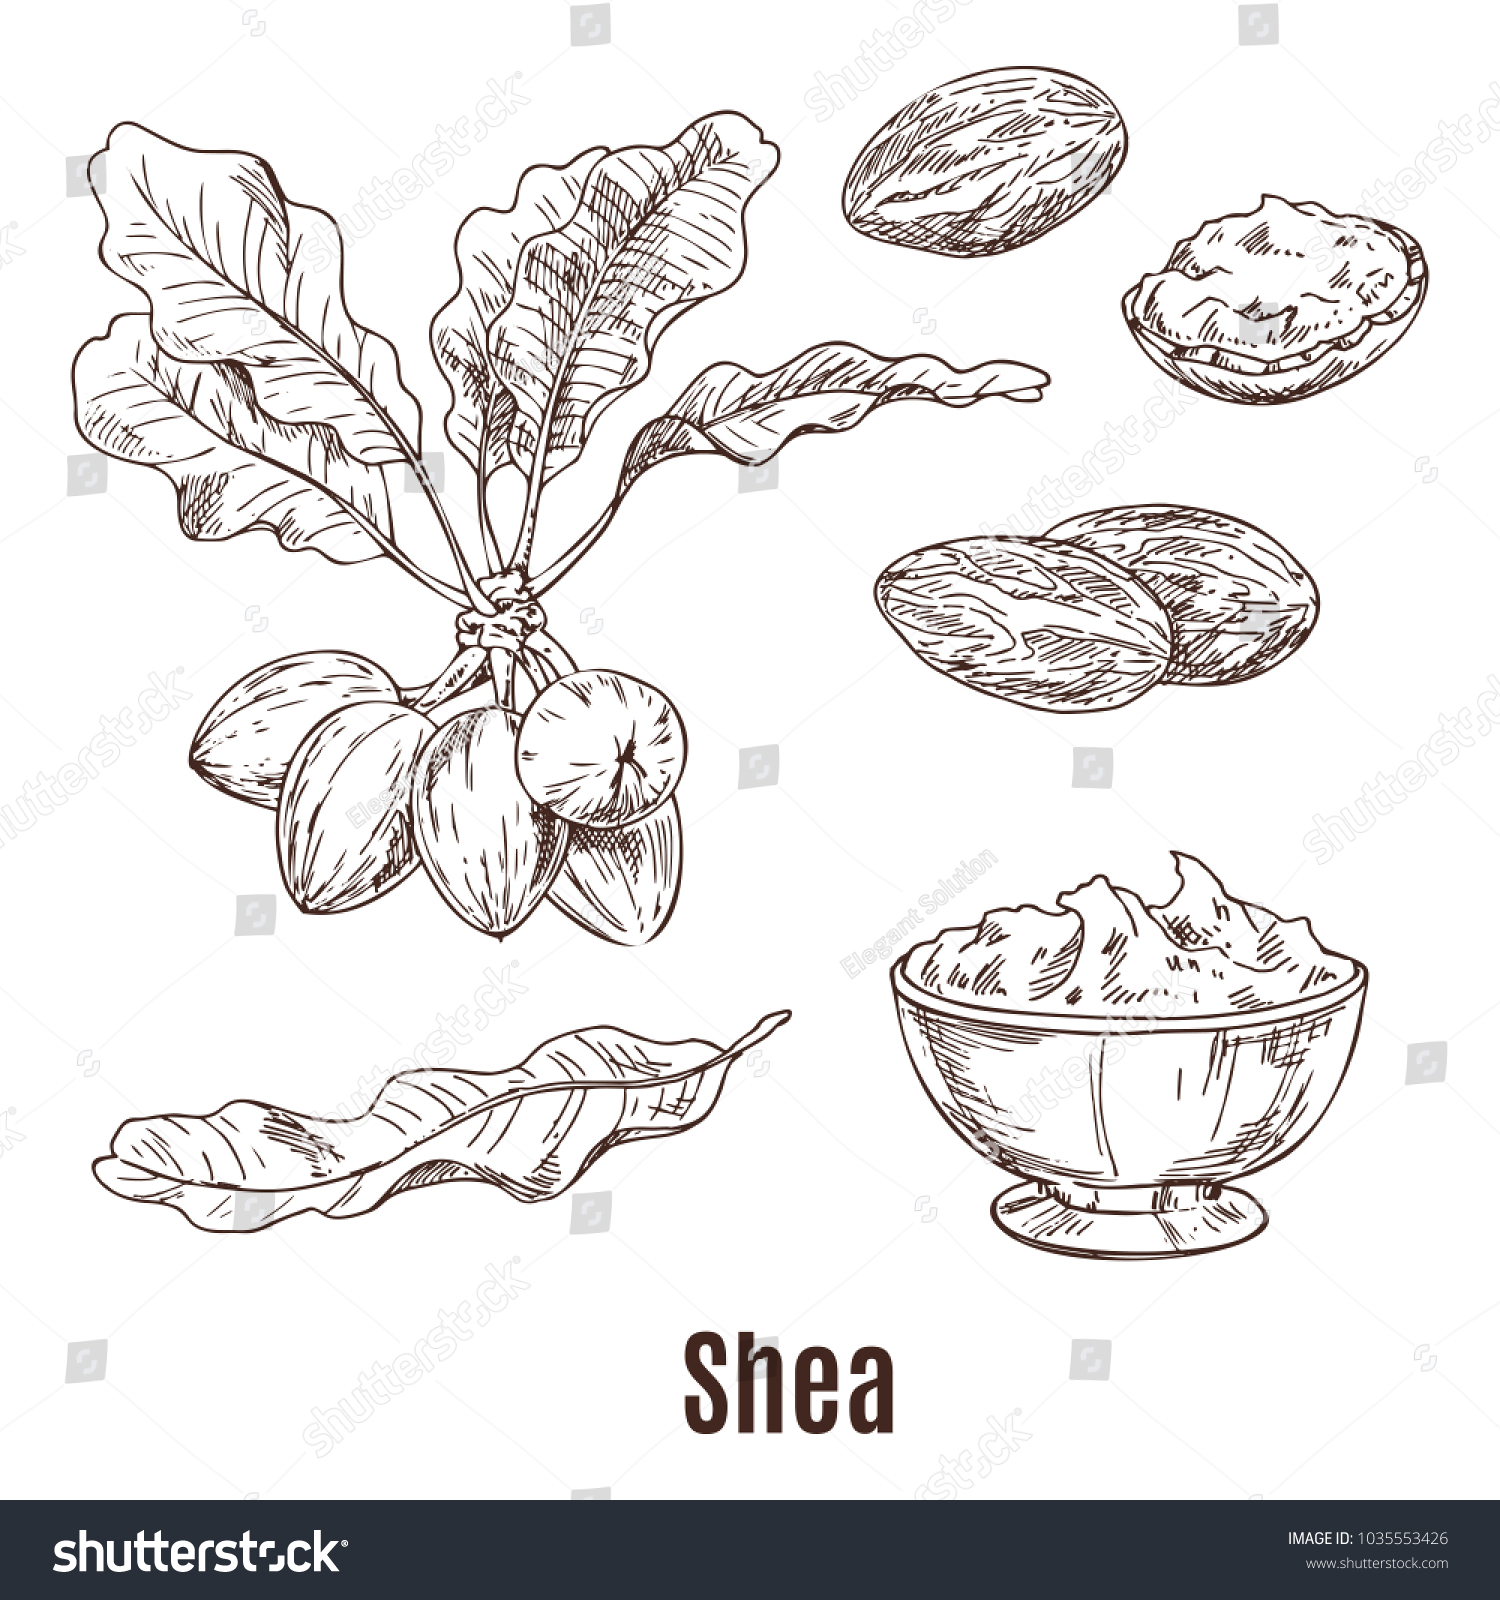 SVG of Isolated sketches of shea nuts and leaves, bowl or cup with shea butter or karite, lotion or moisturizer for skincare, cream or salve for hydrating. Health and dermatology, organic cosmetic theme svg